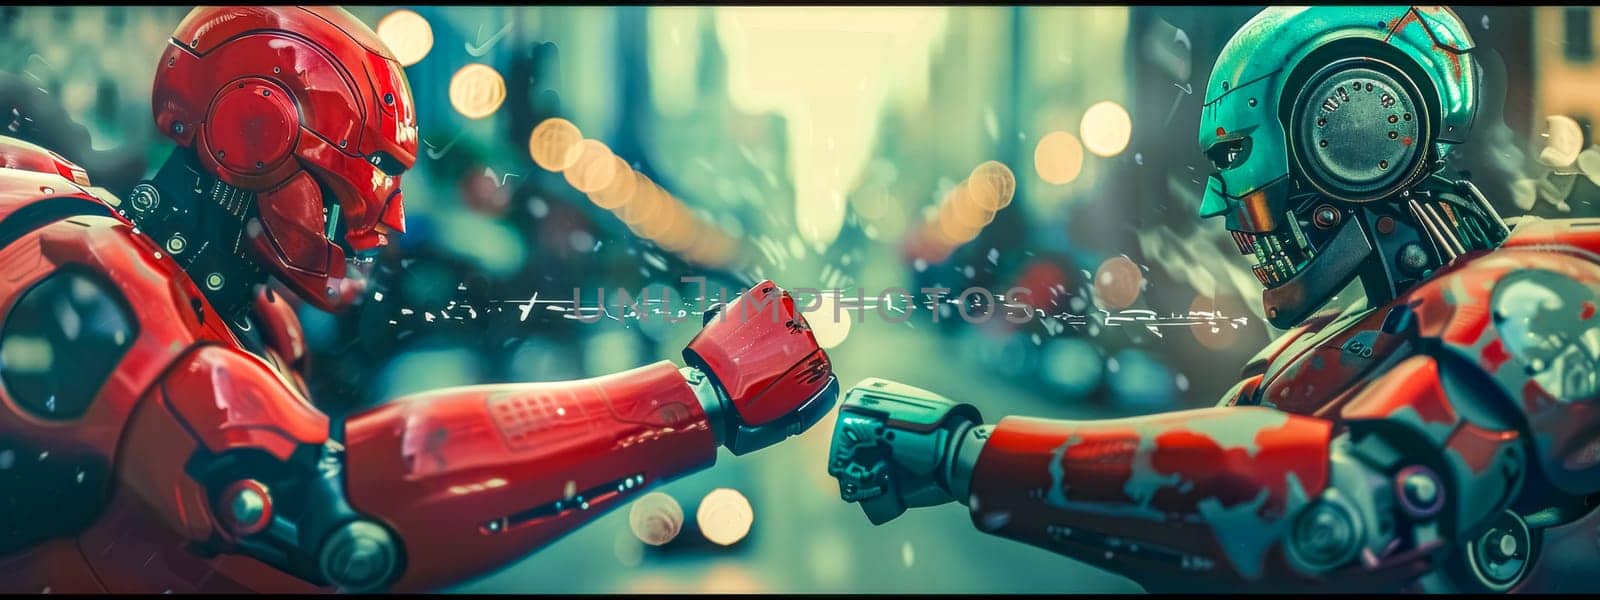 Two robots engage fiercely in an arm wrestling match with vibrant lights in the background